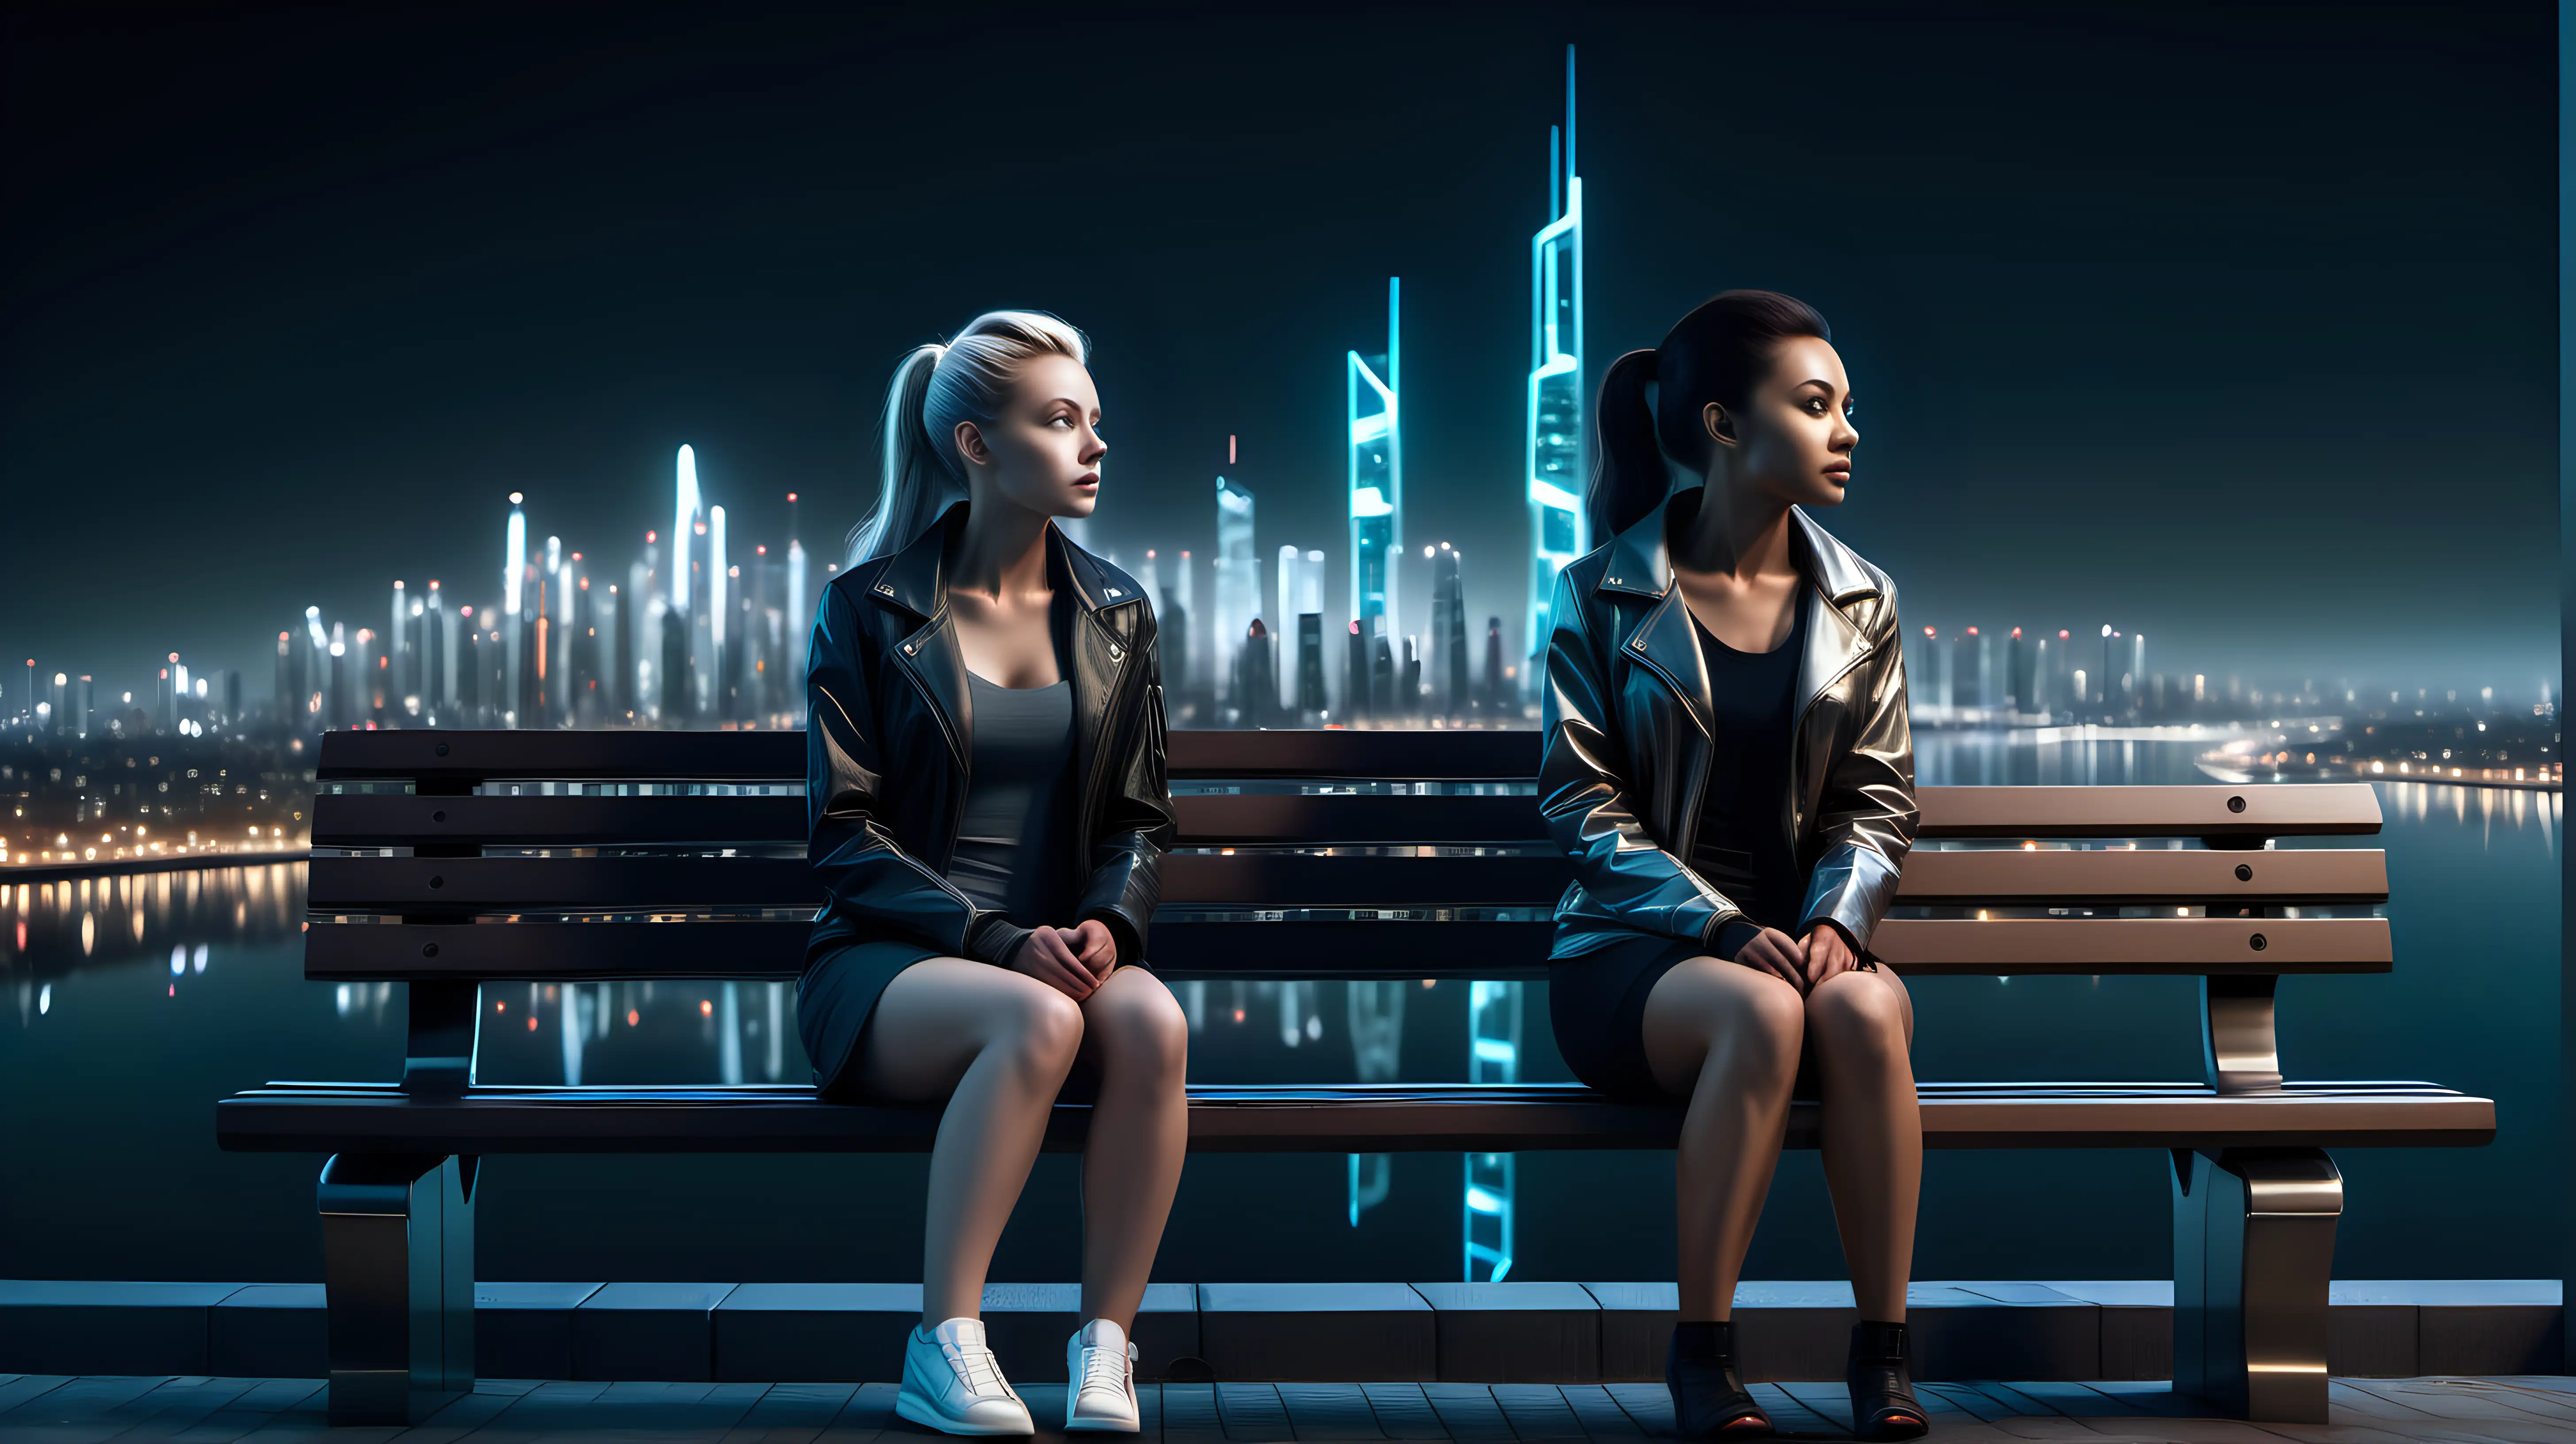 ultra-realistic high resolution and highly detailed photo of 2 human females, sitting on a bench with a futuristic city in the background at night